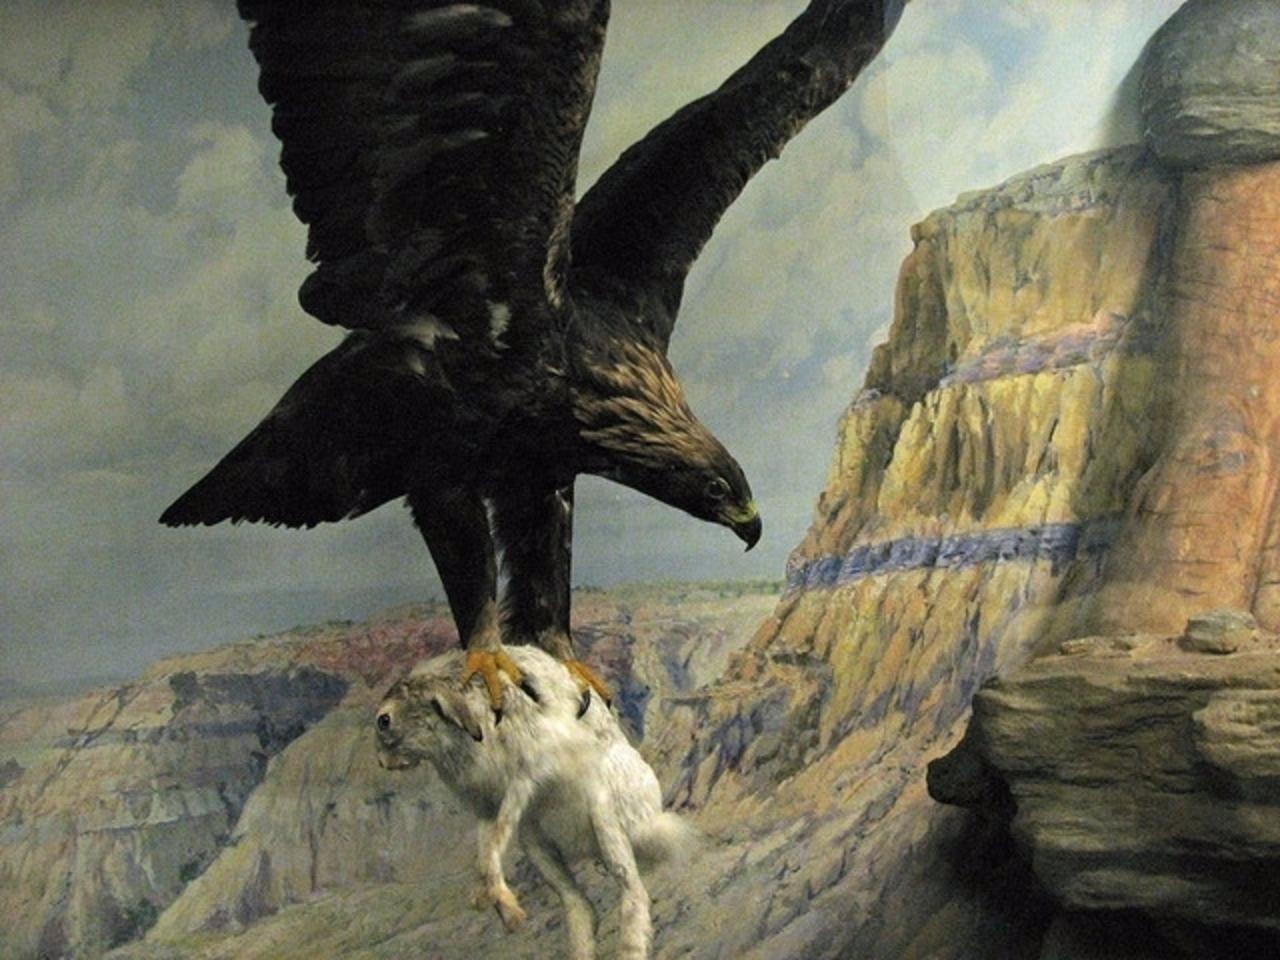 Golden eagle hunting, part of a diorama at the Field Museum in Chicago. Photo courtesy Steve Richmond/Wikimedia Commons